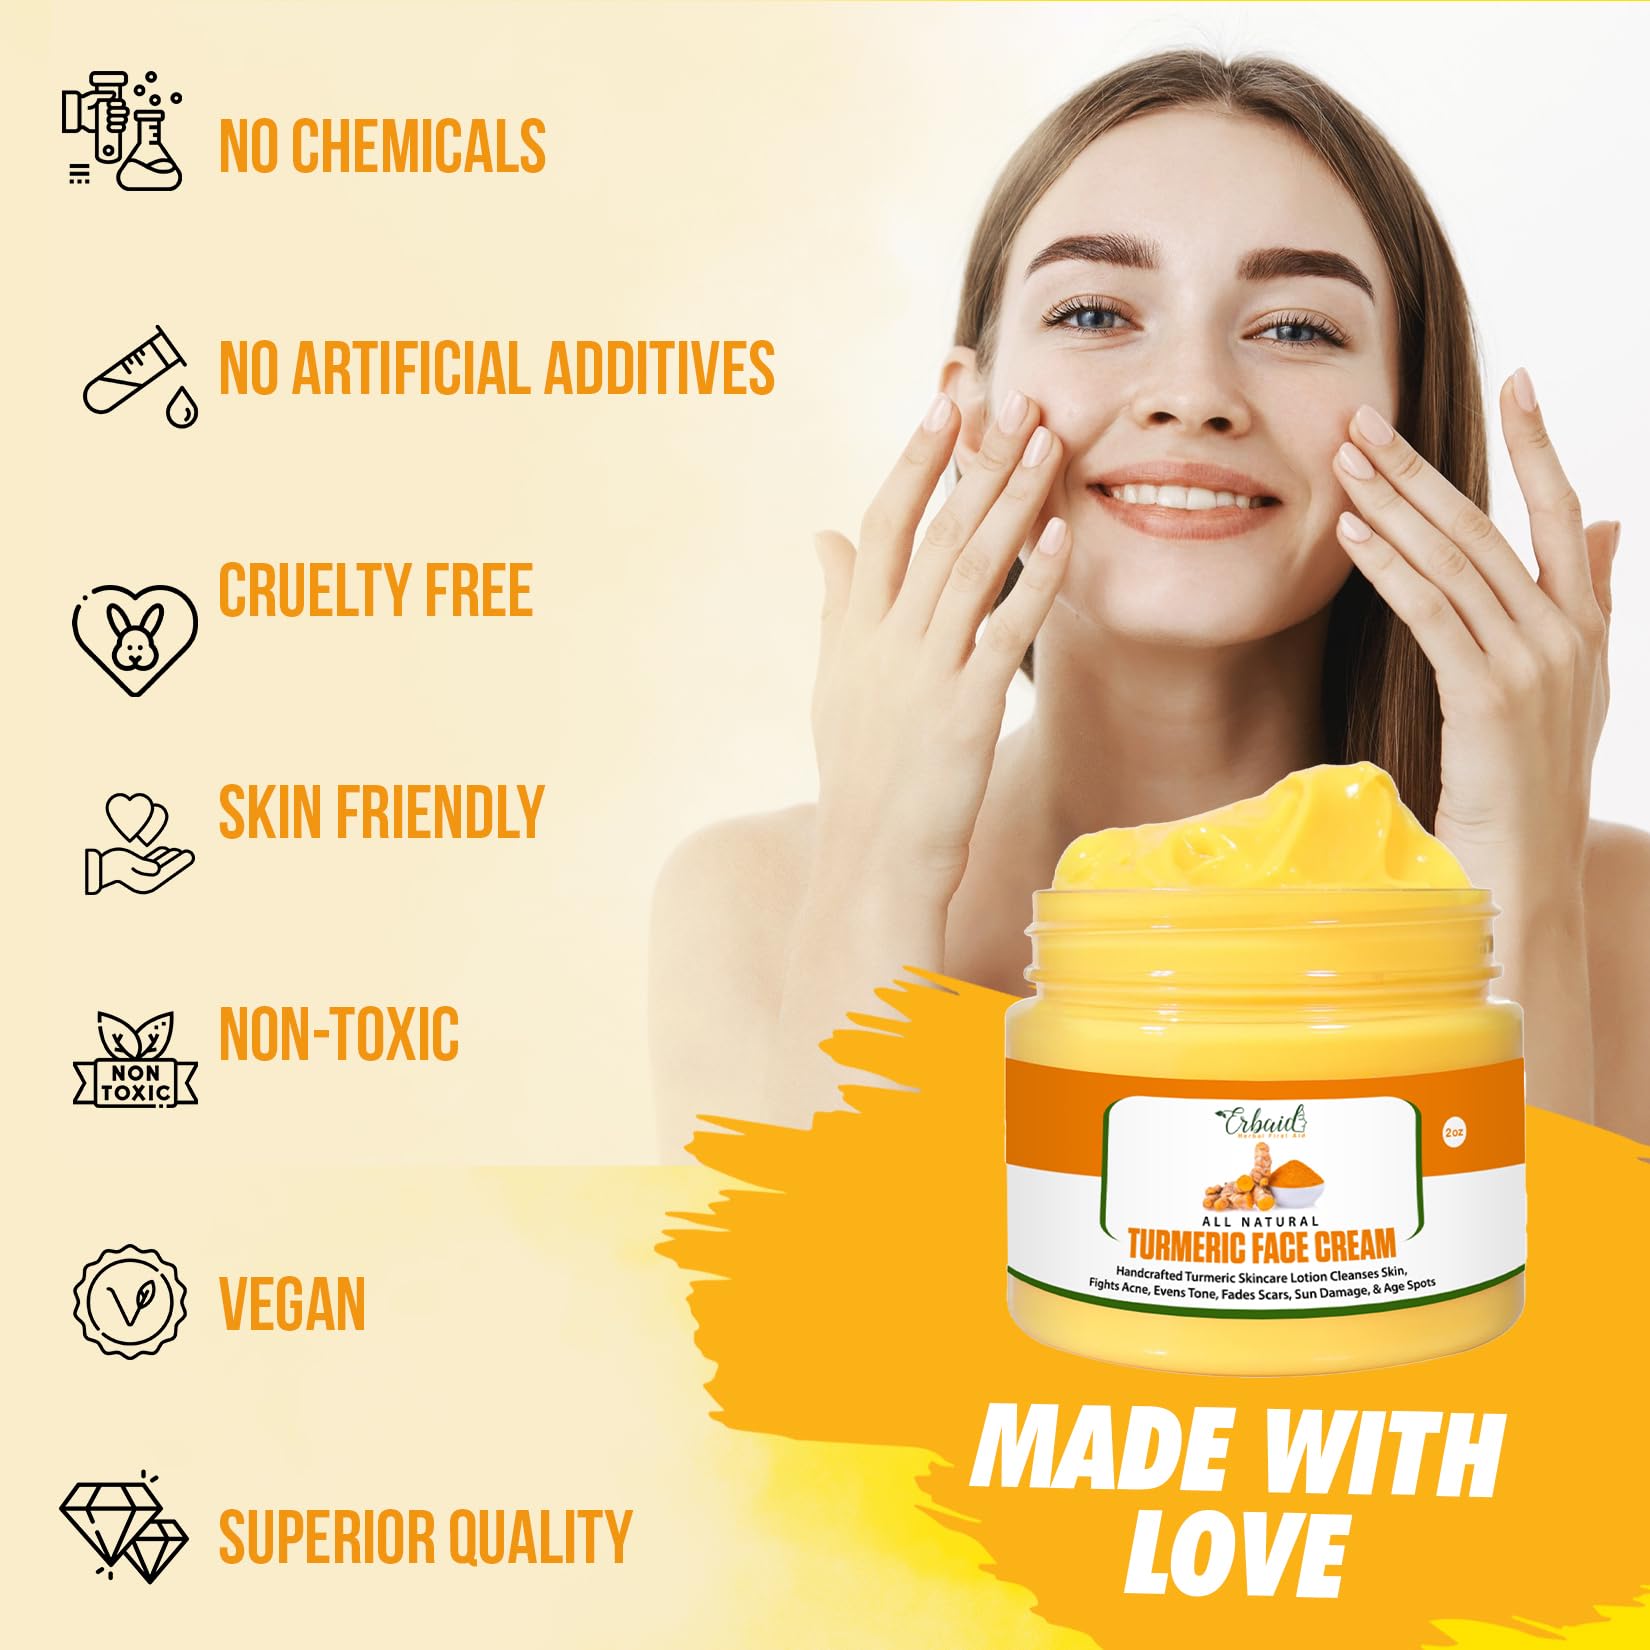 Turmeric Face Cream for Face & Body - All Natural Turmeric Skin Brightening Lotion - Turmeric Cleanses Skin, Fights Acne, Evens Tone, Fades Scars, Sun Damage, & Age Spots - Handcrafted Made in USA